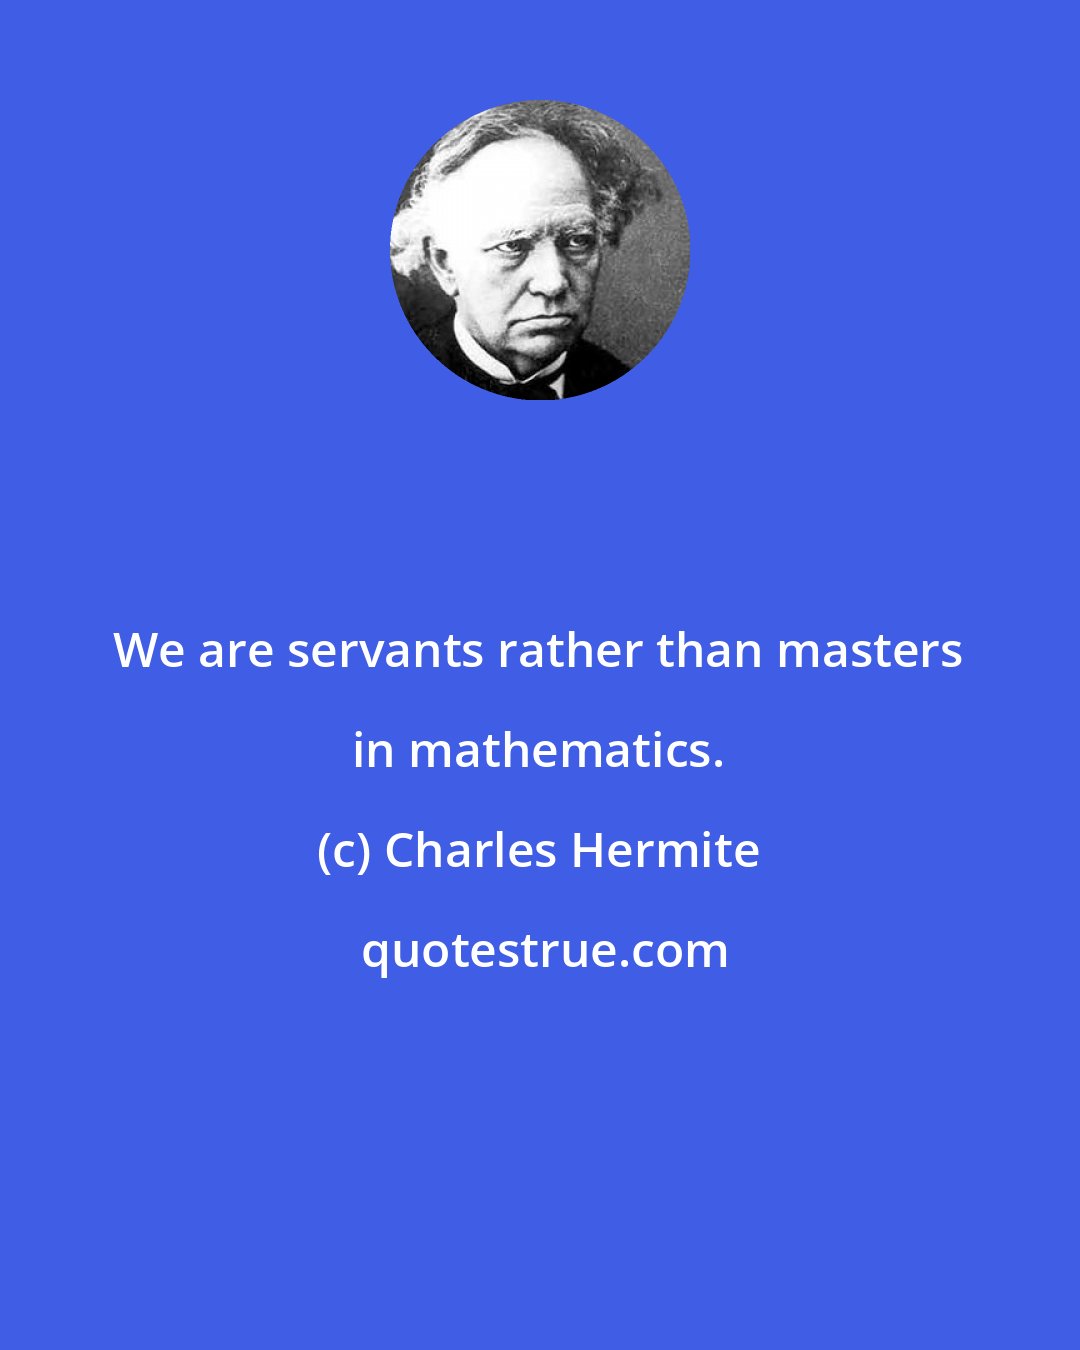 Charles Hermite: We are servants rather than masters in mathematics.